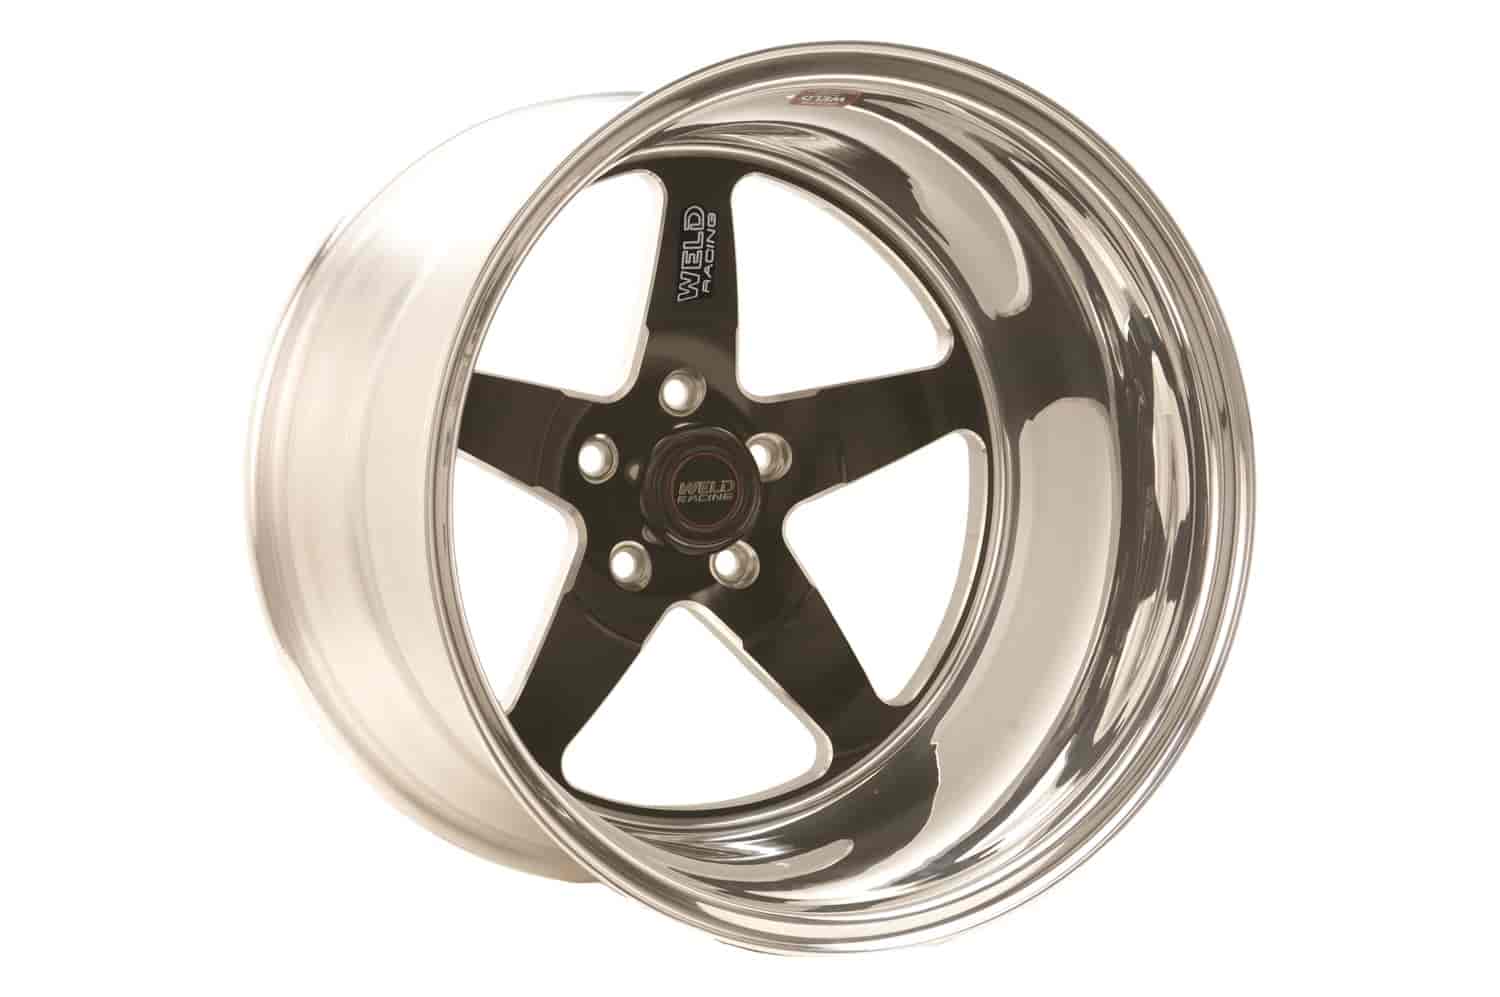 RT-S Series S71 Wheel Size: 15" x 10" Bolt Circle: 5 x 4-1/2" Back Space: 6-1/2"